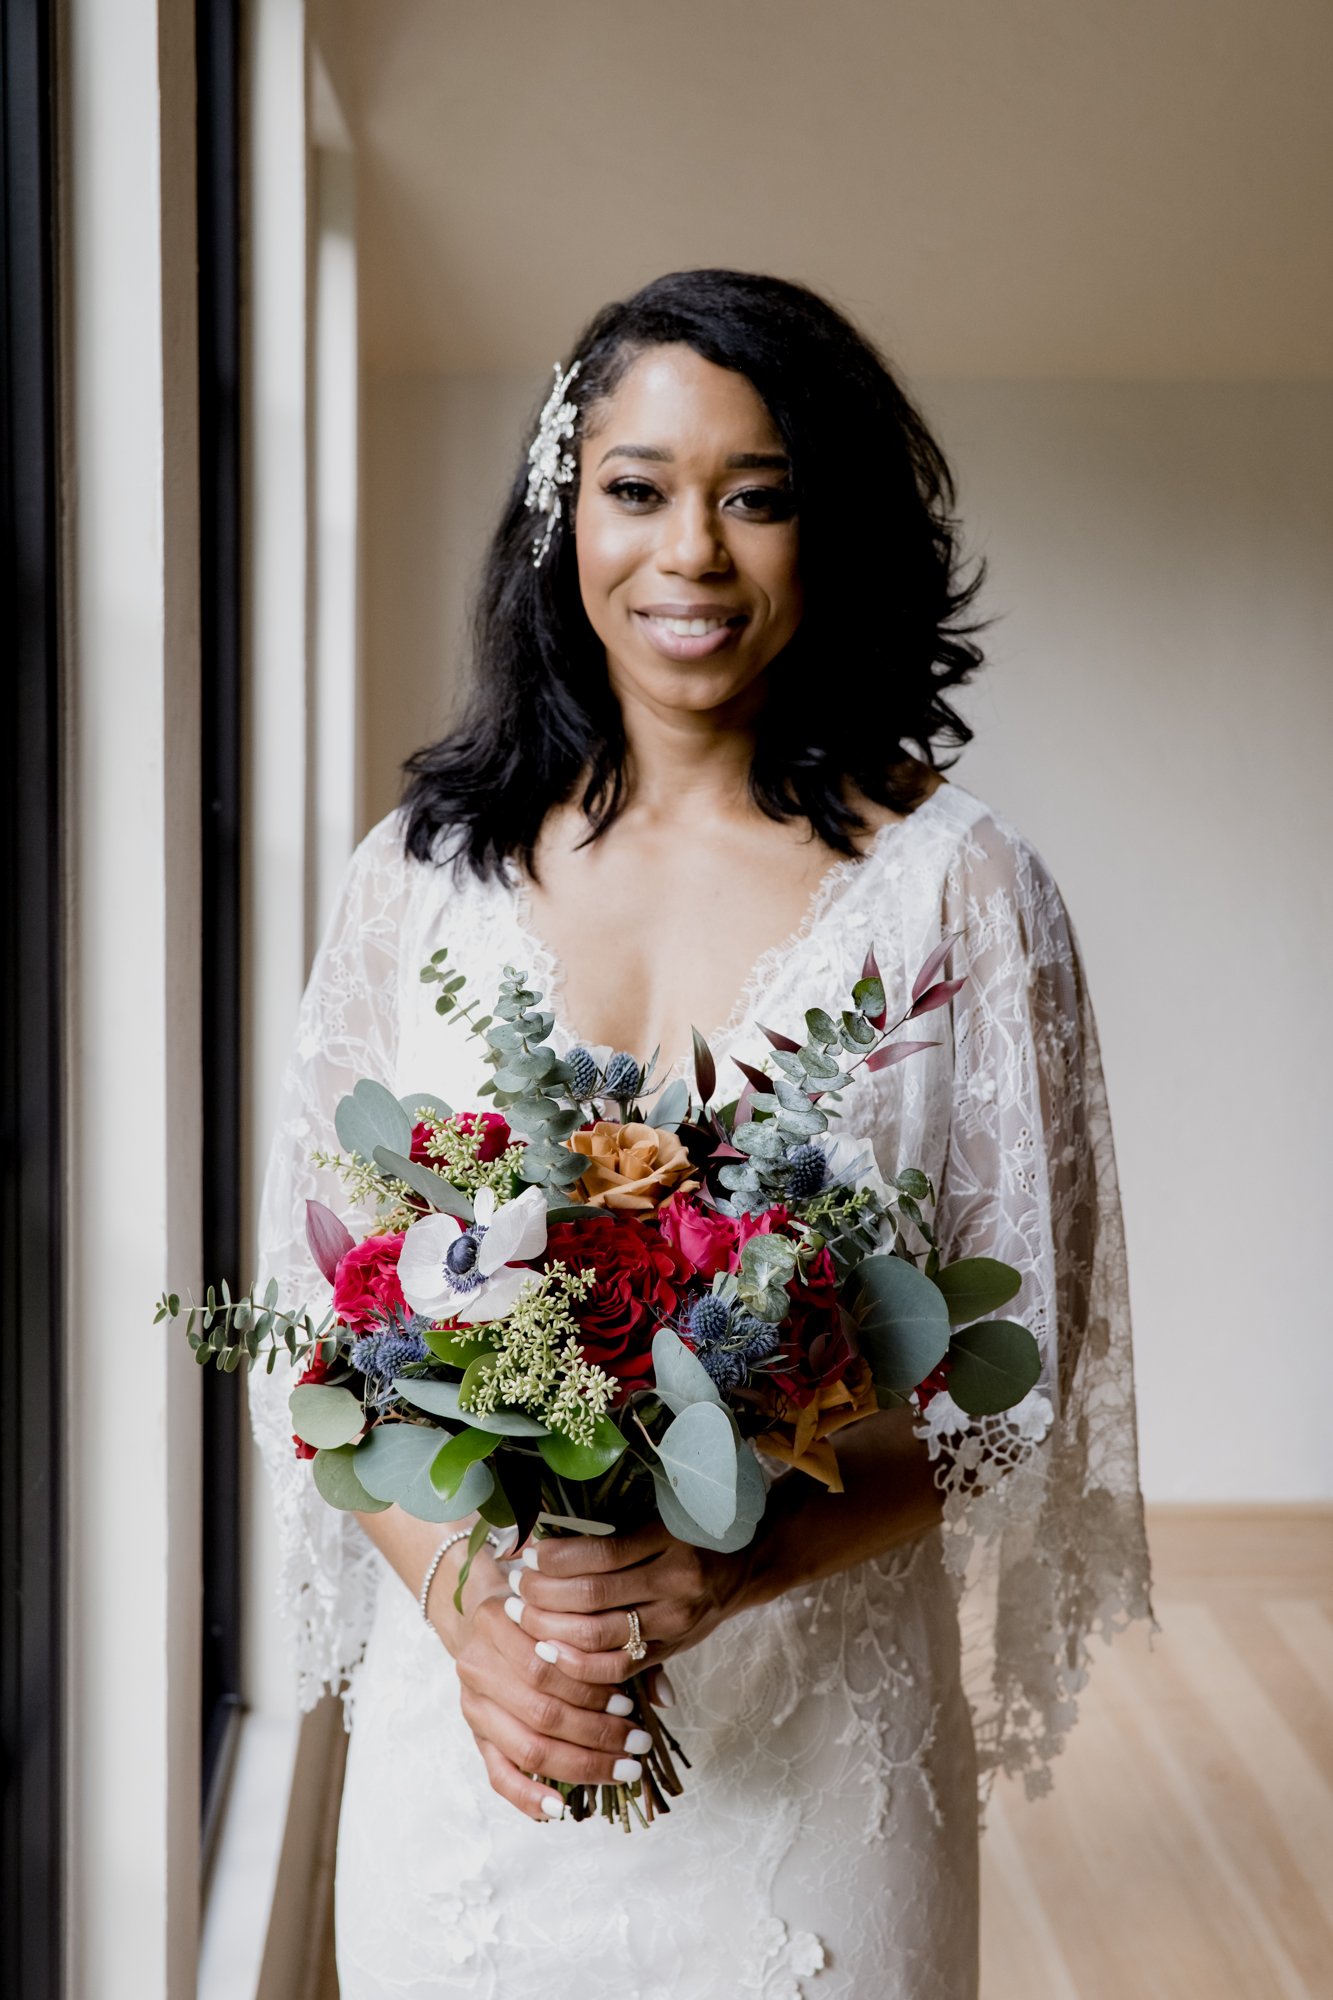 Bridal portraits, bride holding the bouquet next to the window. Wedding at The Oak Atelier